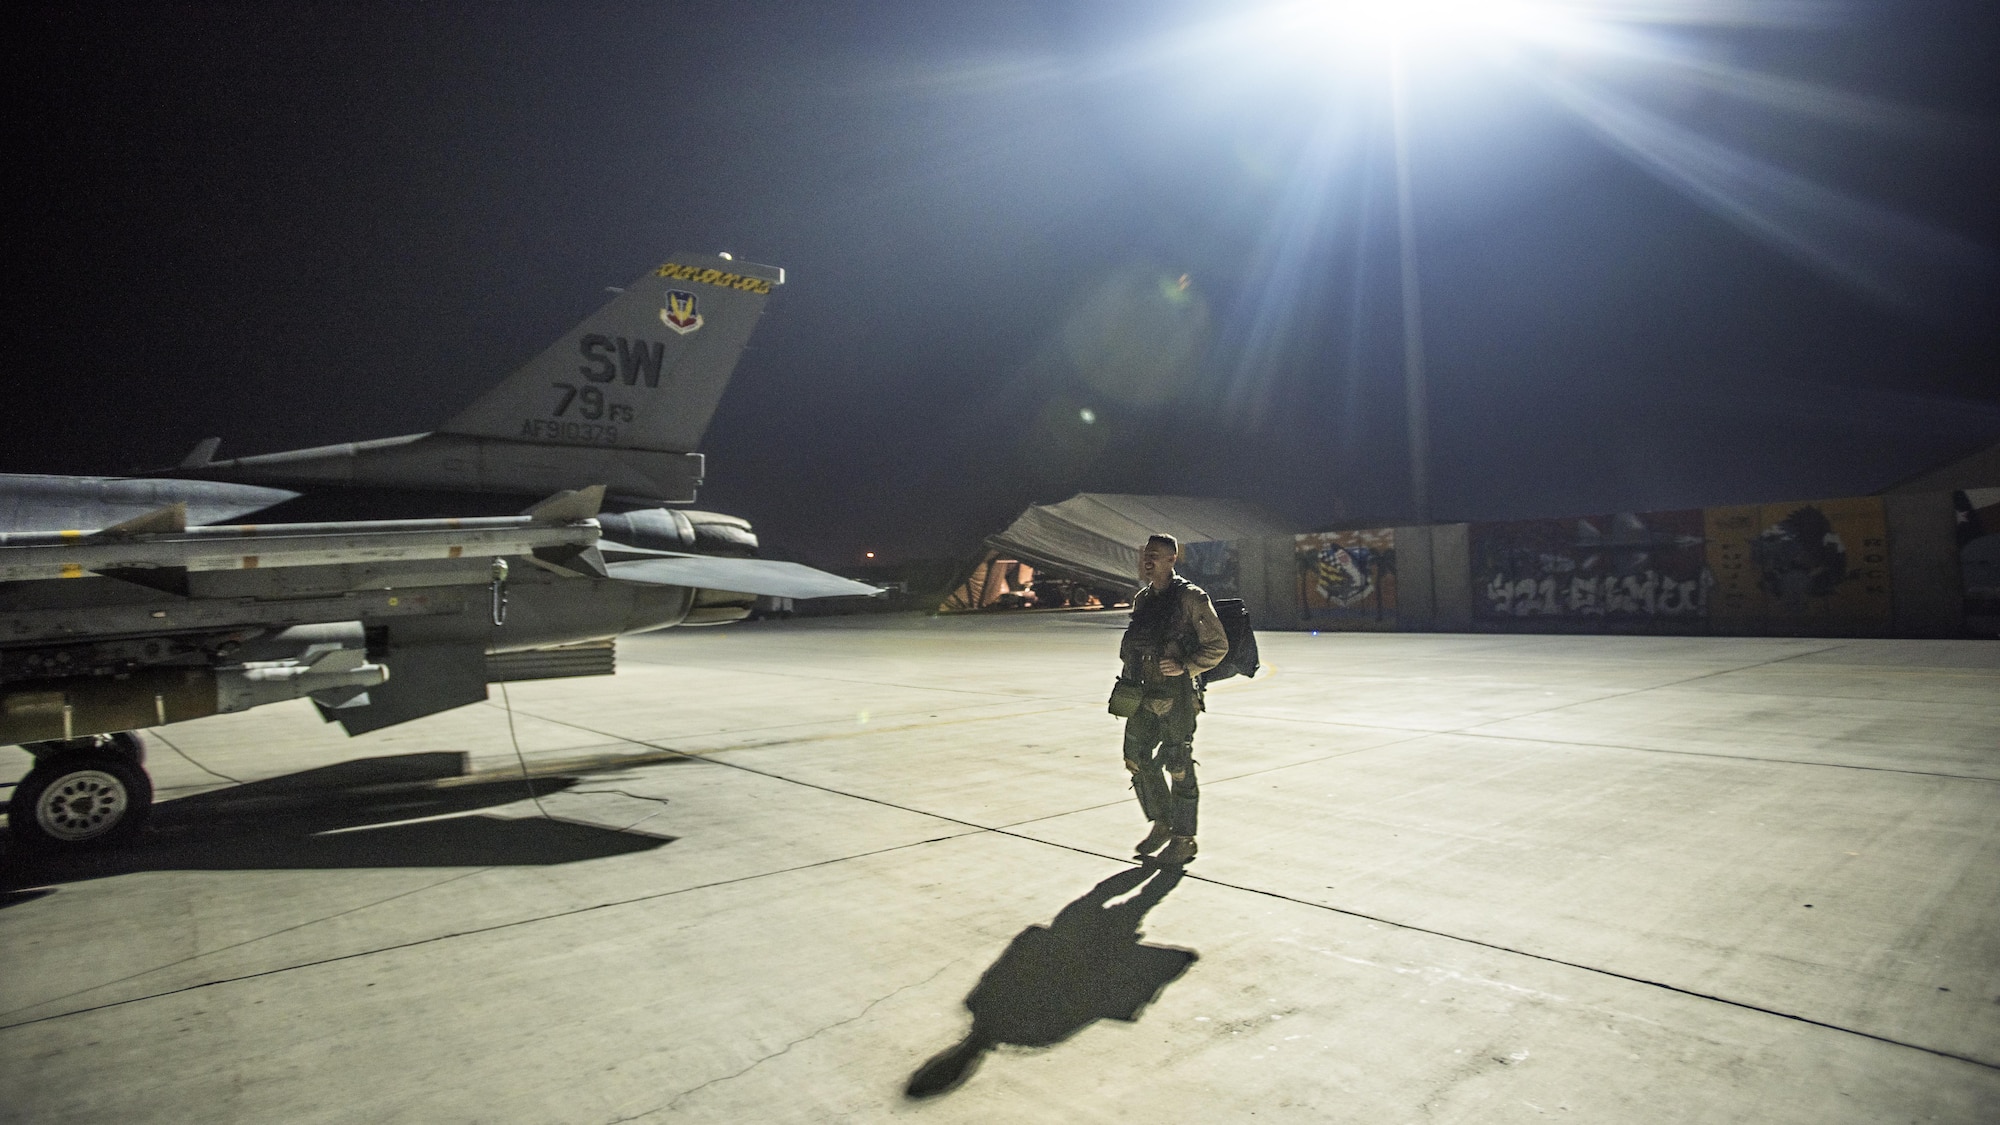 Capt. David, 79th Expeditionary Fighter Squadron pilot, walks out to an F-16 Fighting Falcon before a night mission Jan. 13, 2017 at Bagram Airfield, Afghanistan. David enlisted in the Air Force in 2004 as an F-16 avionics specialist and now flies the same airframe he used to maintain. (U.S. Air Force photo by Staff Sgt. Katherine Spessa)